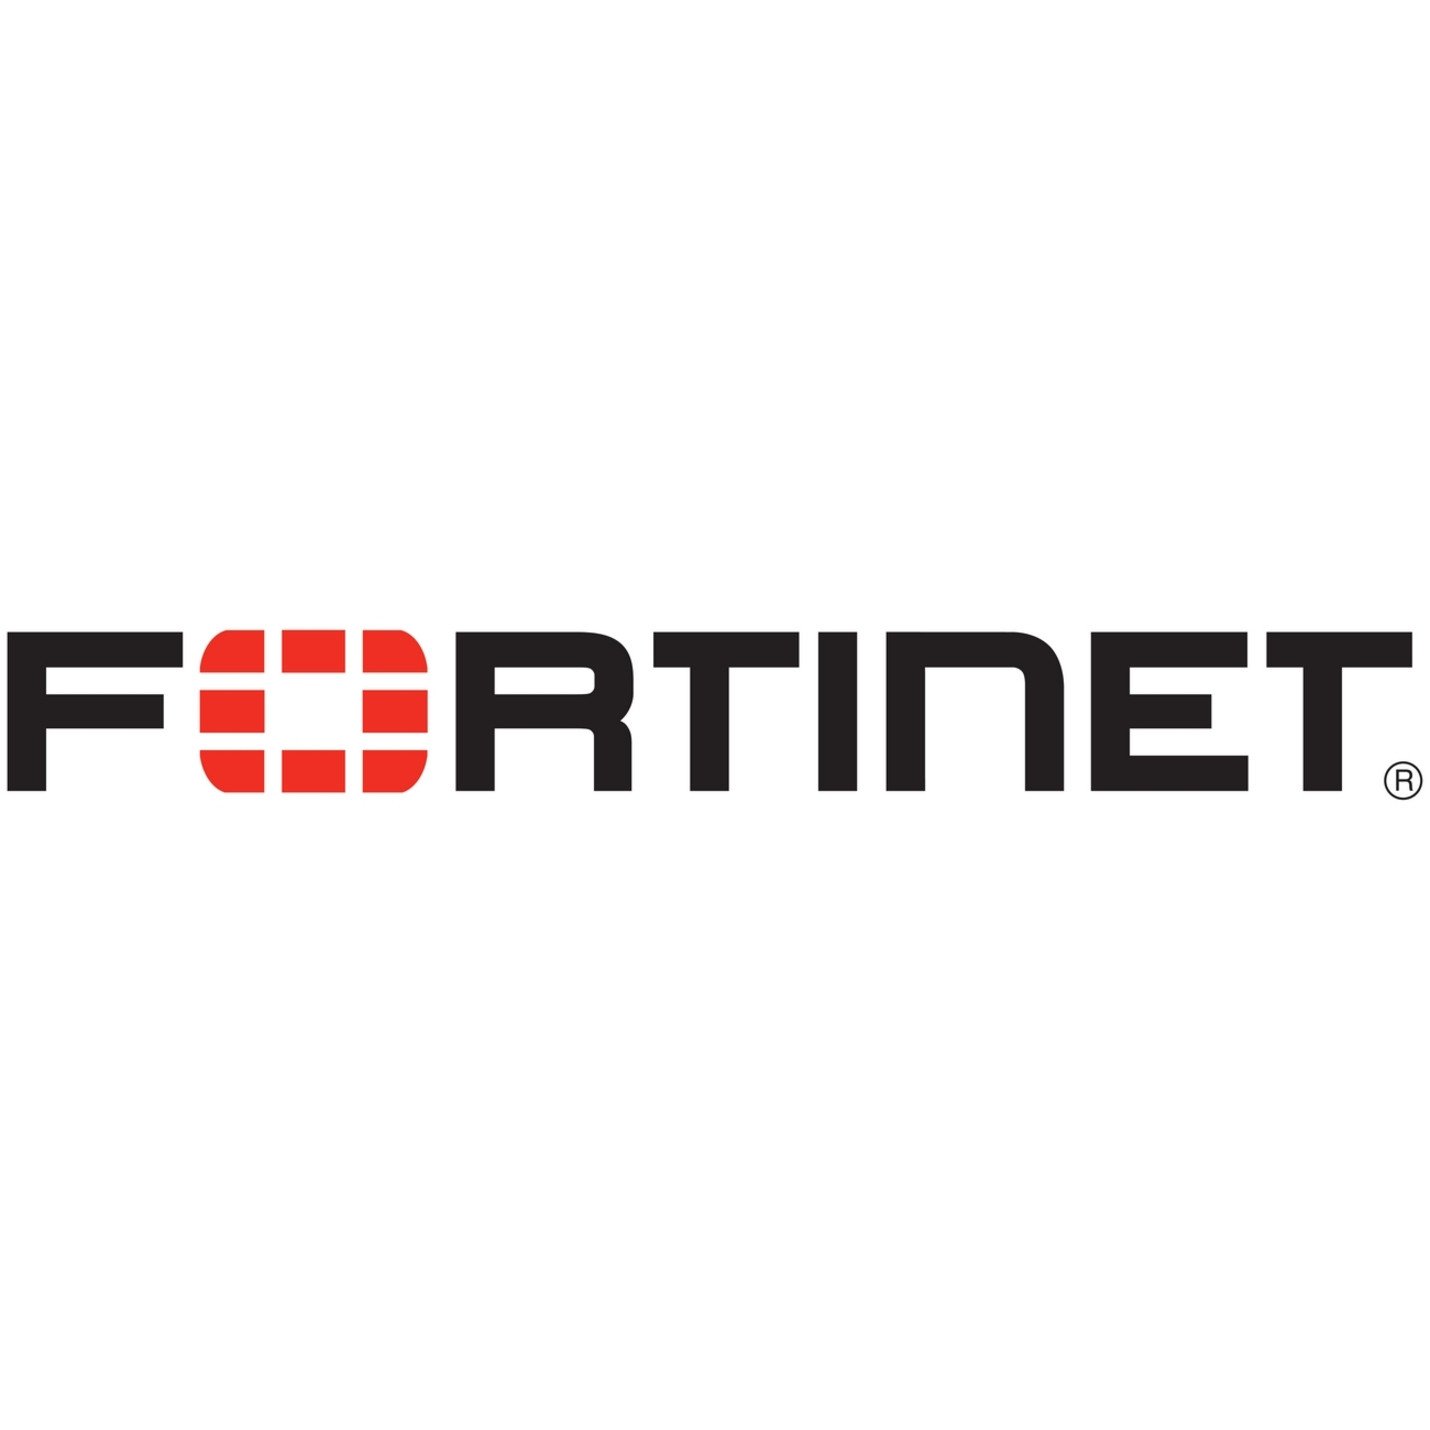 Fortinet Multi-Threat Security Systems IITechnology Training Course3 Day Duration FT-FGT2